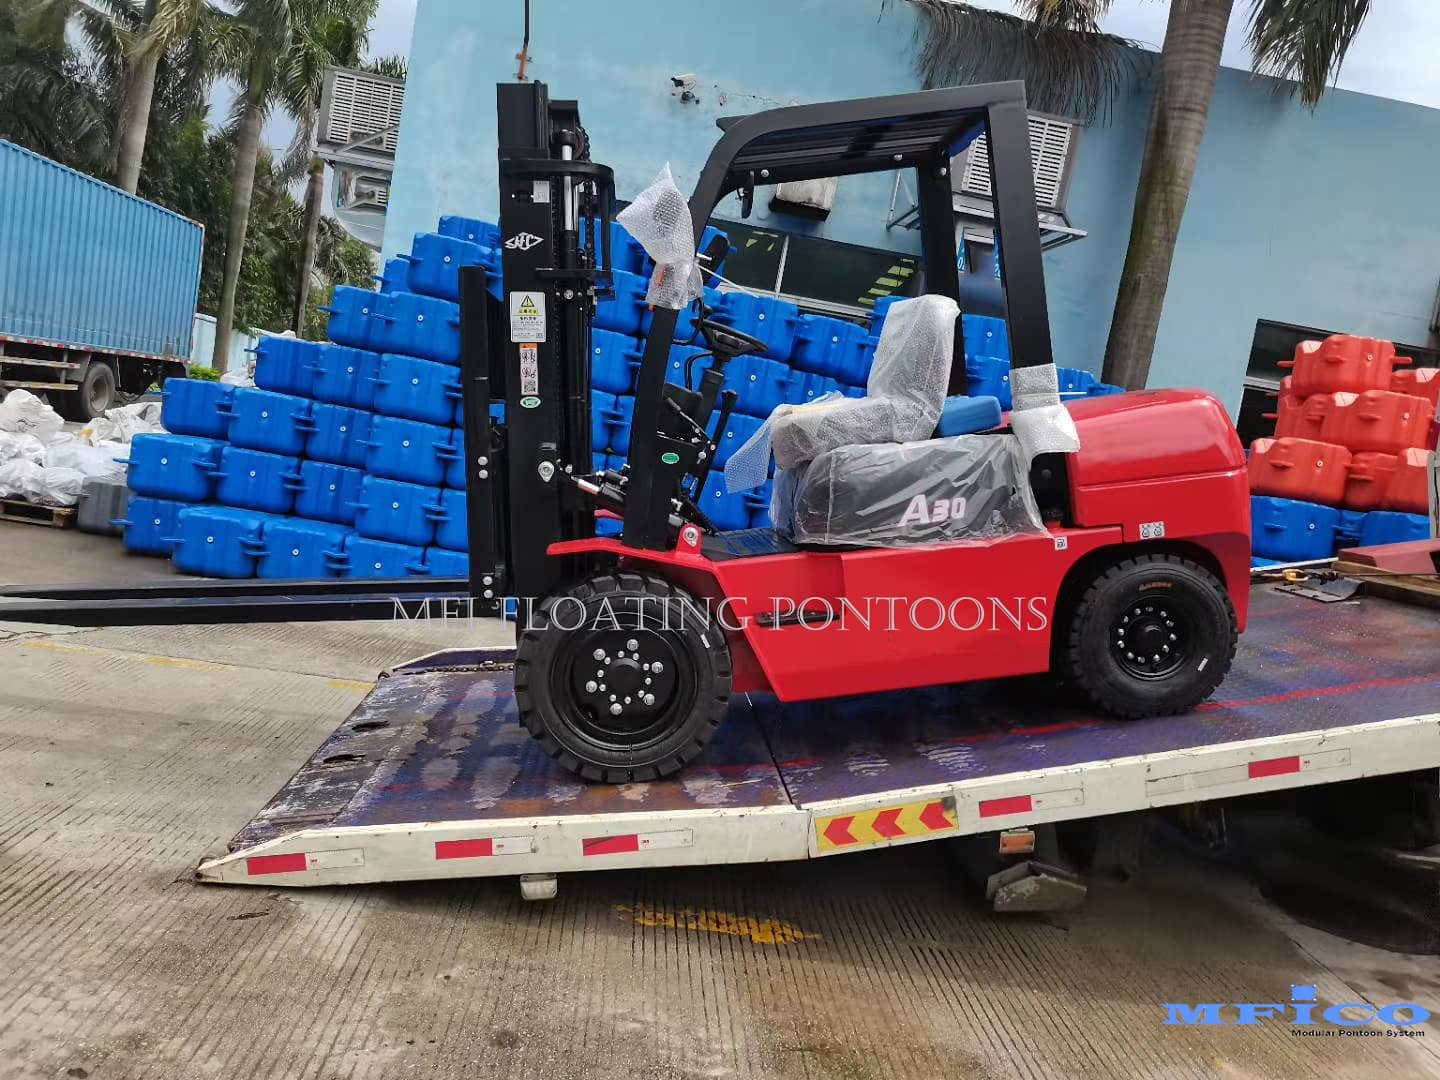 Welcome our new loading assistant😄
It will allow us to be more efficient on logistics and deliveries.  20 years of experience | 30 countries exporting | 100% quality guaranteed | 365 days support | ISO 9001 certificate | Factory direct supply | Global shipping  #pontoonchina #maxfloats #MFIfloatingpontoons #floatingpontoon #modularpontoon #floatingdock  #pontoondock #pontoonfloat #floatingplatform #floatingsolar #jetskidock #dockbuilder #boatdock #boatlift #plasticpontoon #modulardock #rowingdock #waterfront #watersports #pontoon #marina #docks #jetty #jetski #rowing #kayak